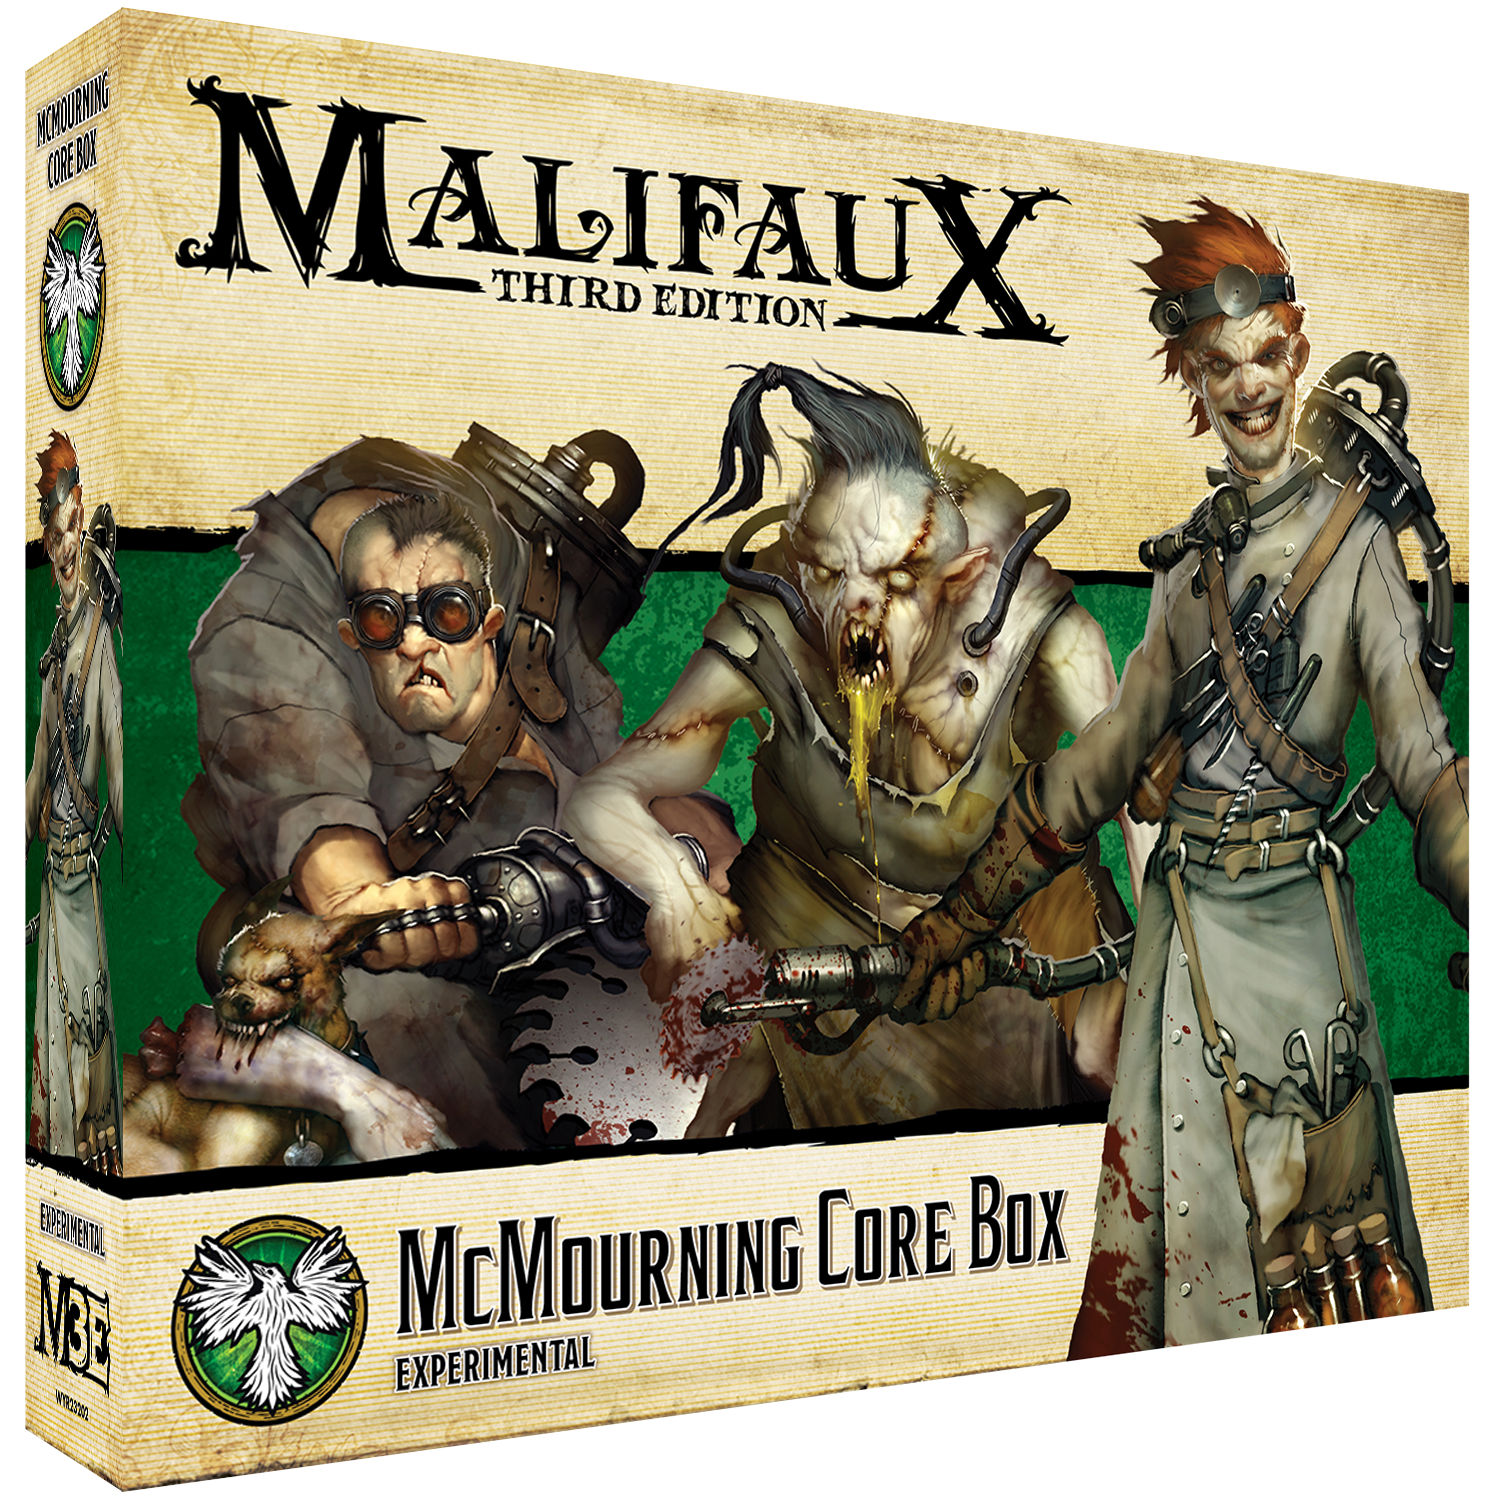 Details about   Malifaux Third Edition Call to Madness 